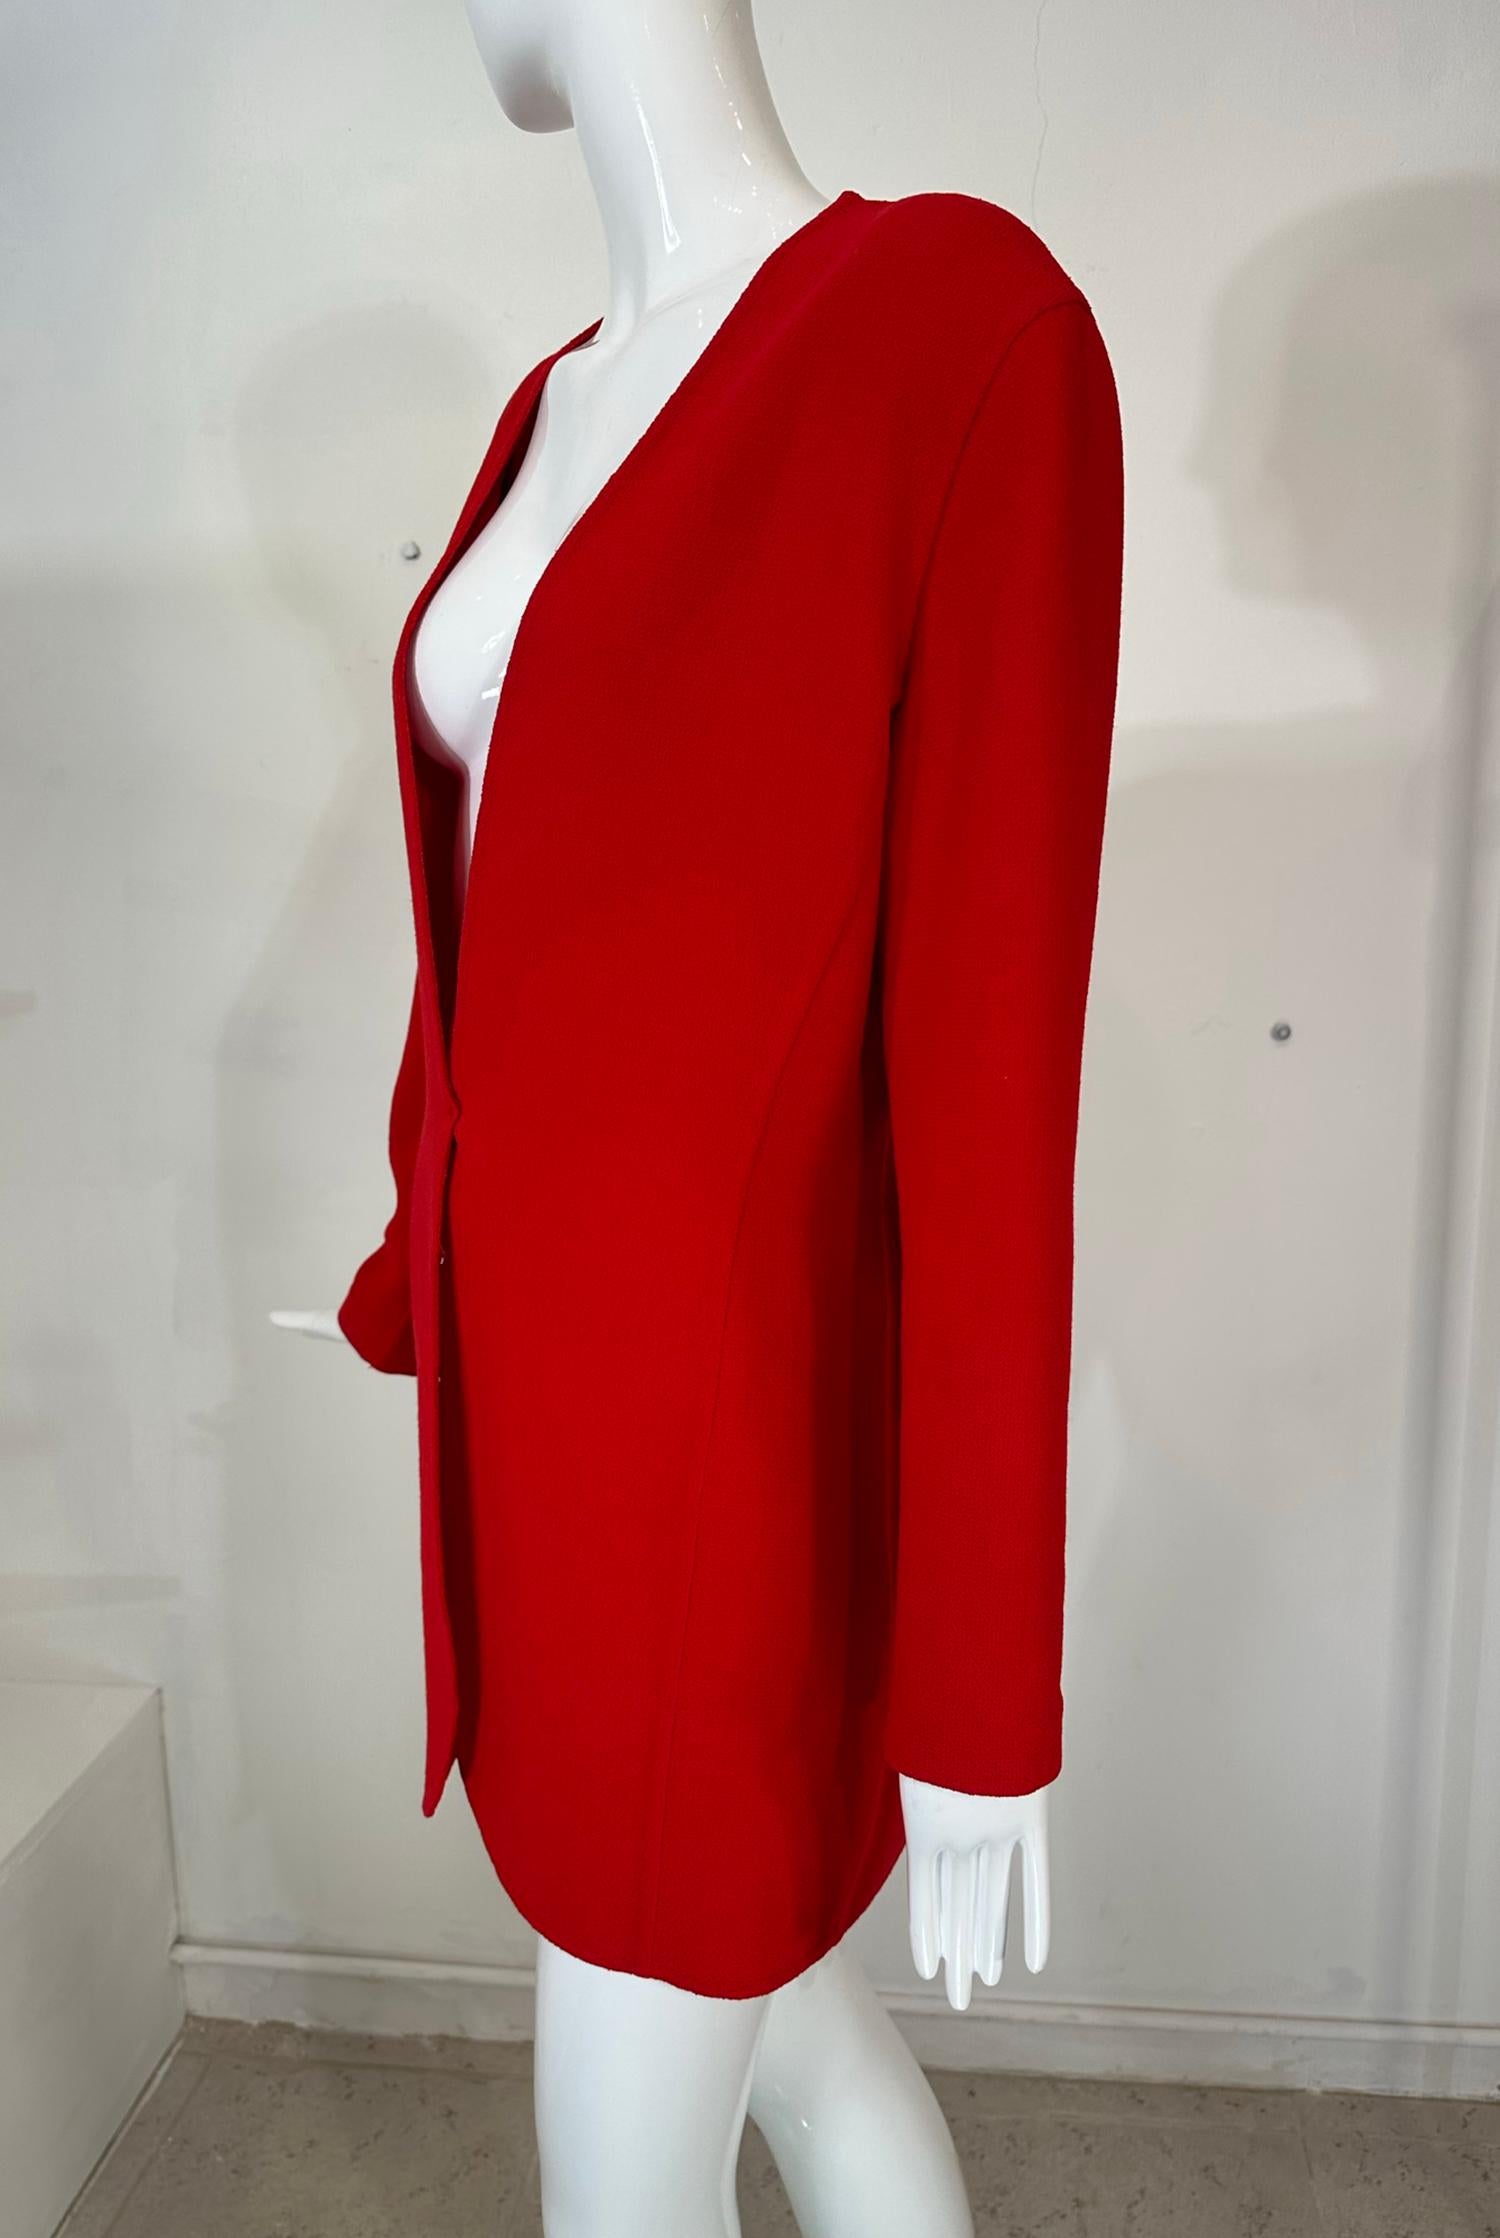 Donna Karan Black Label Fire Engine Red Double Face Wool Jacket For Sale 6